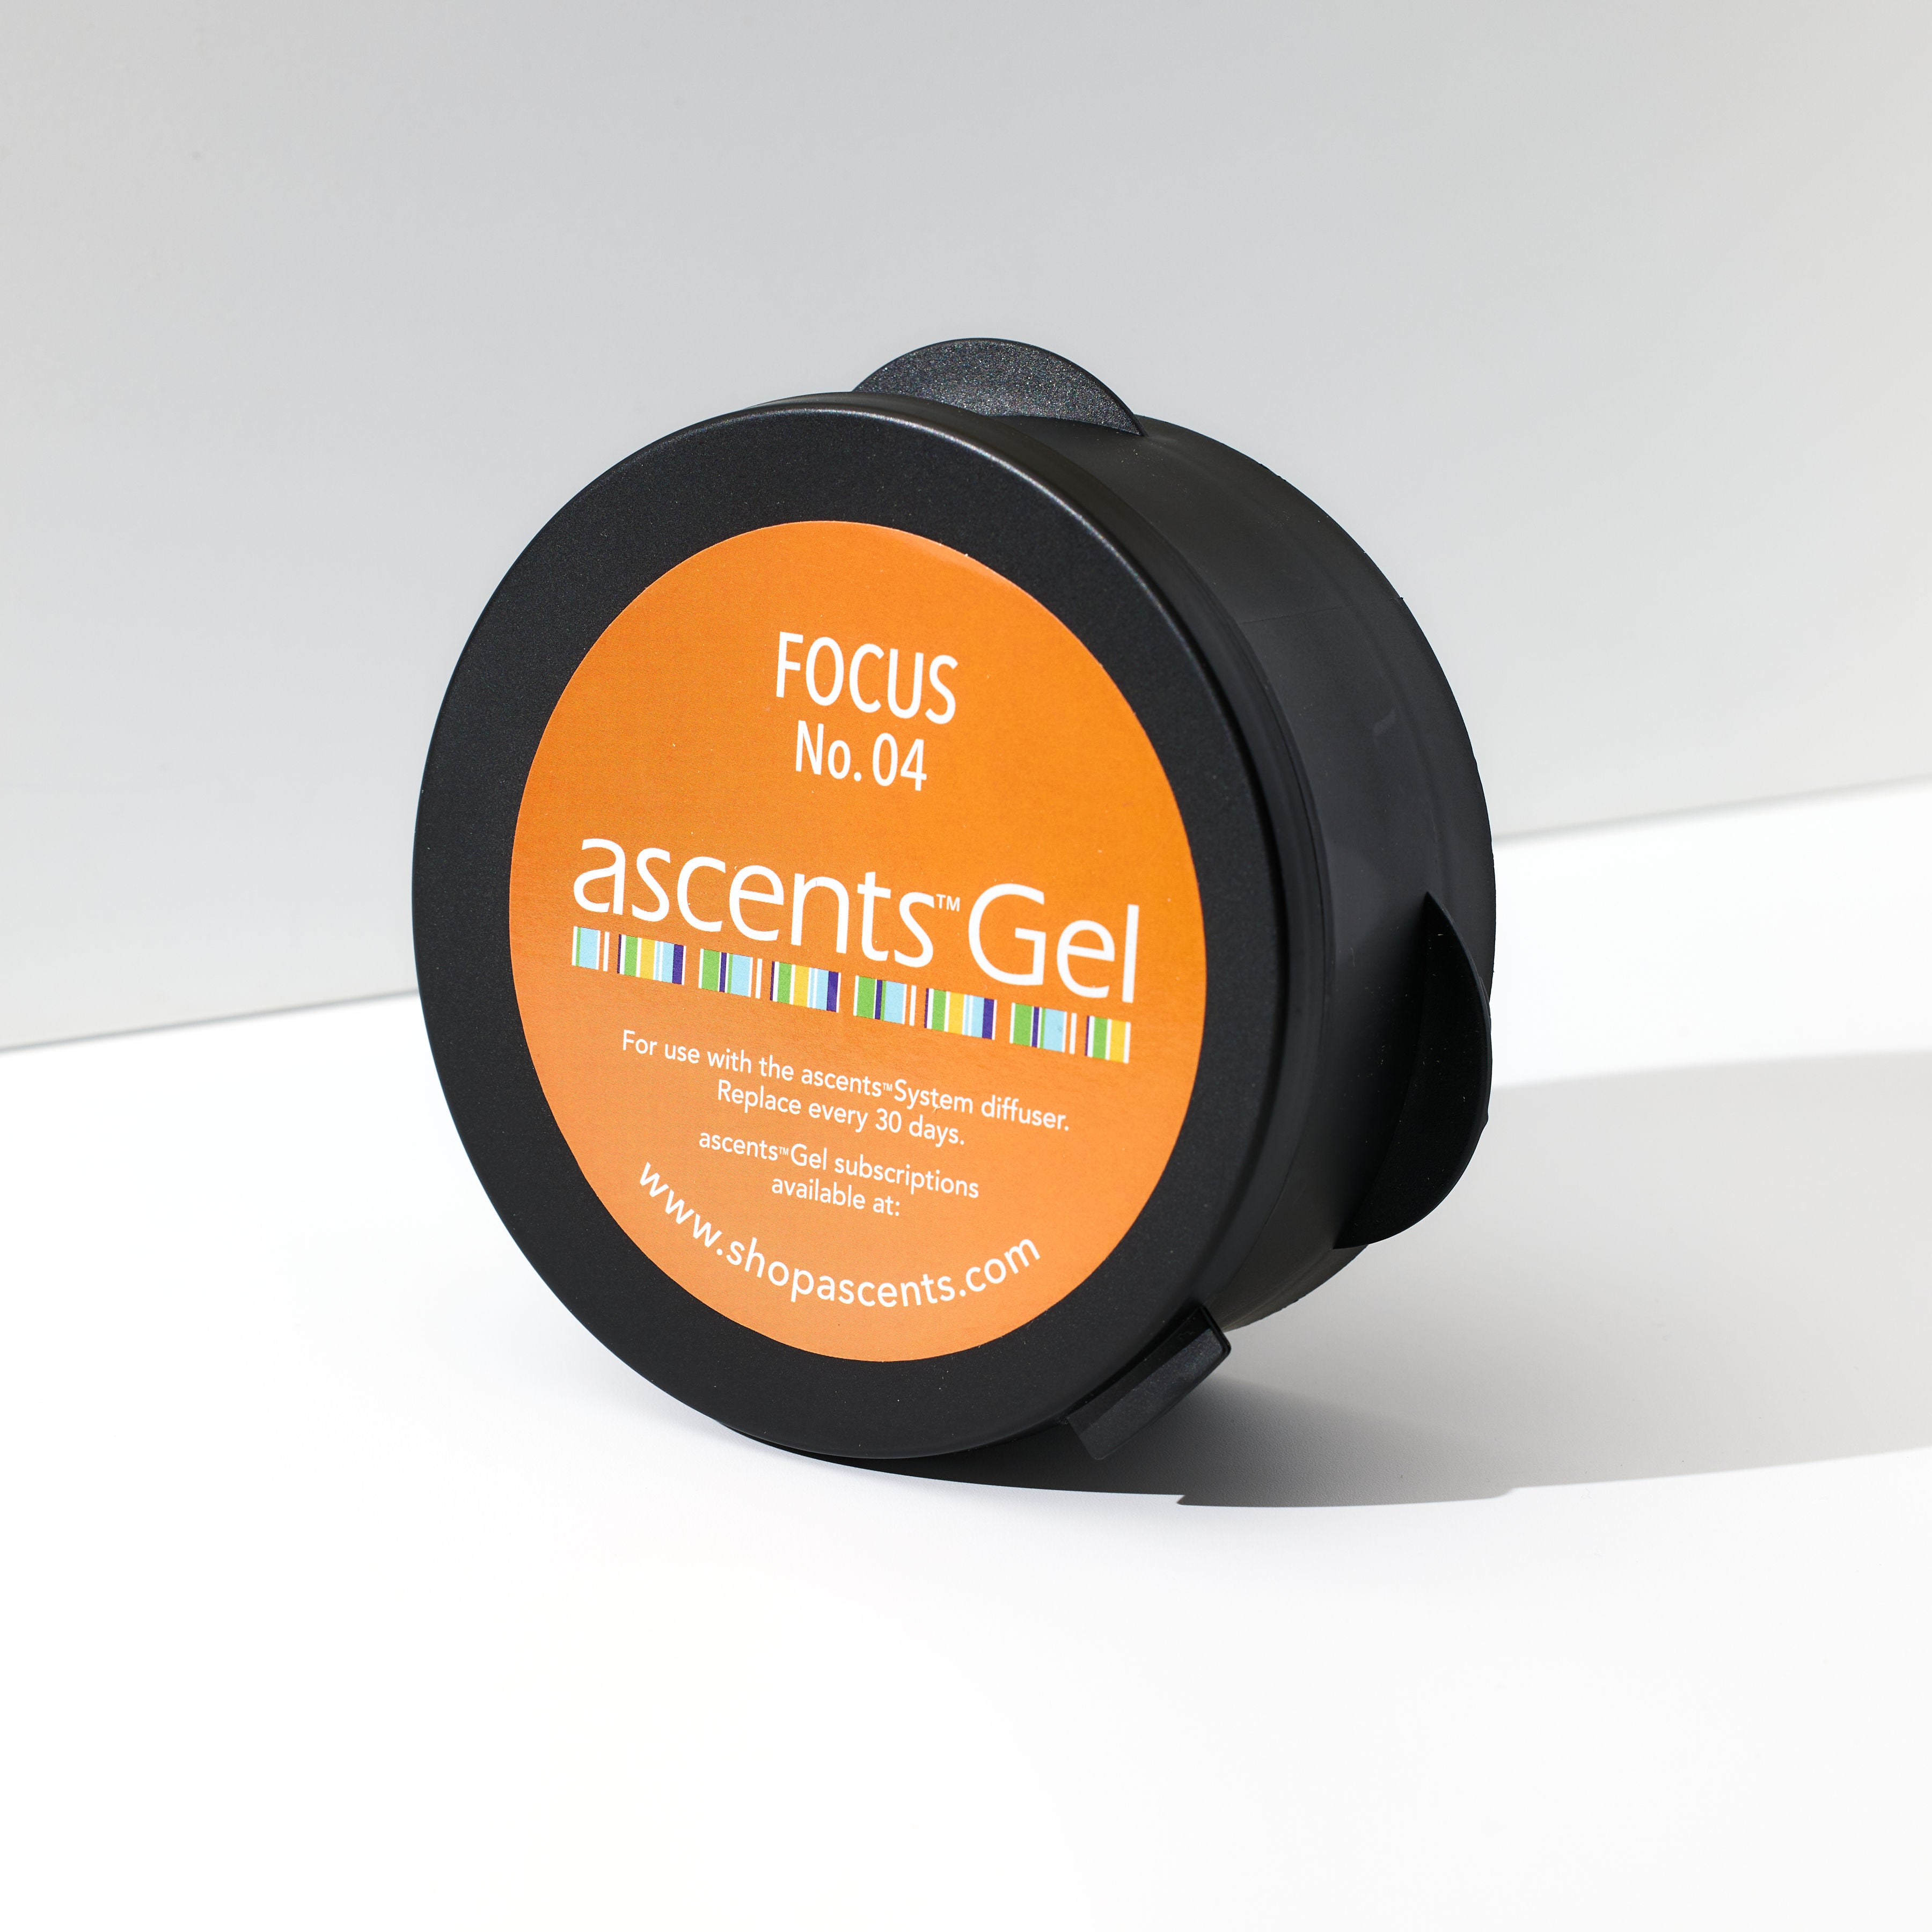 Diffuser & Focus Gel - For Concentration & Productivity